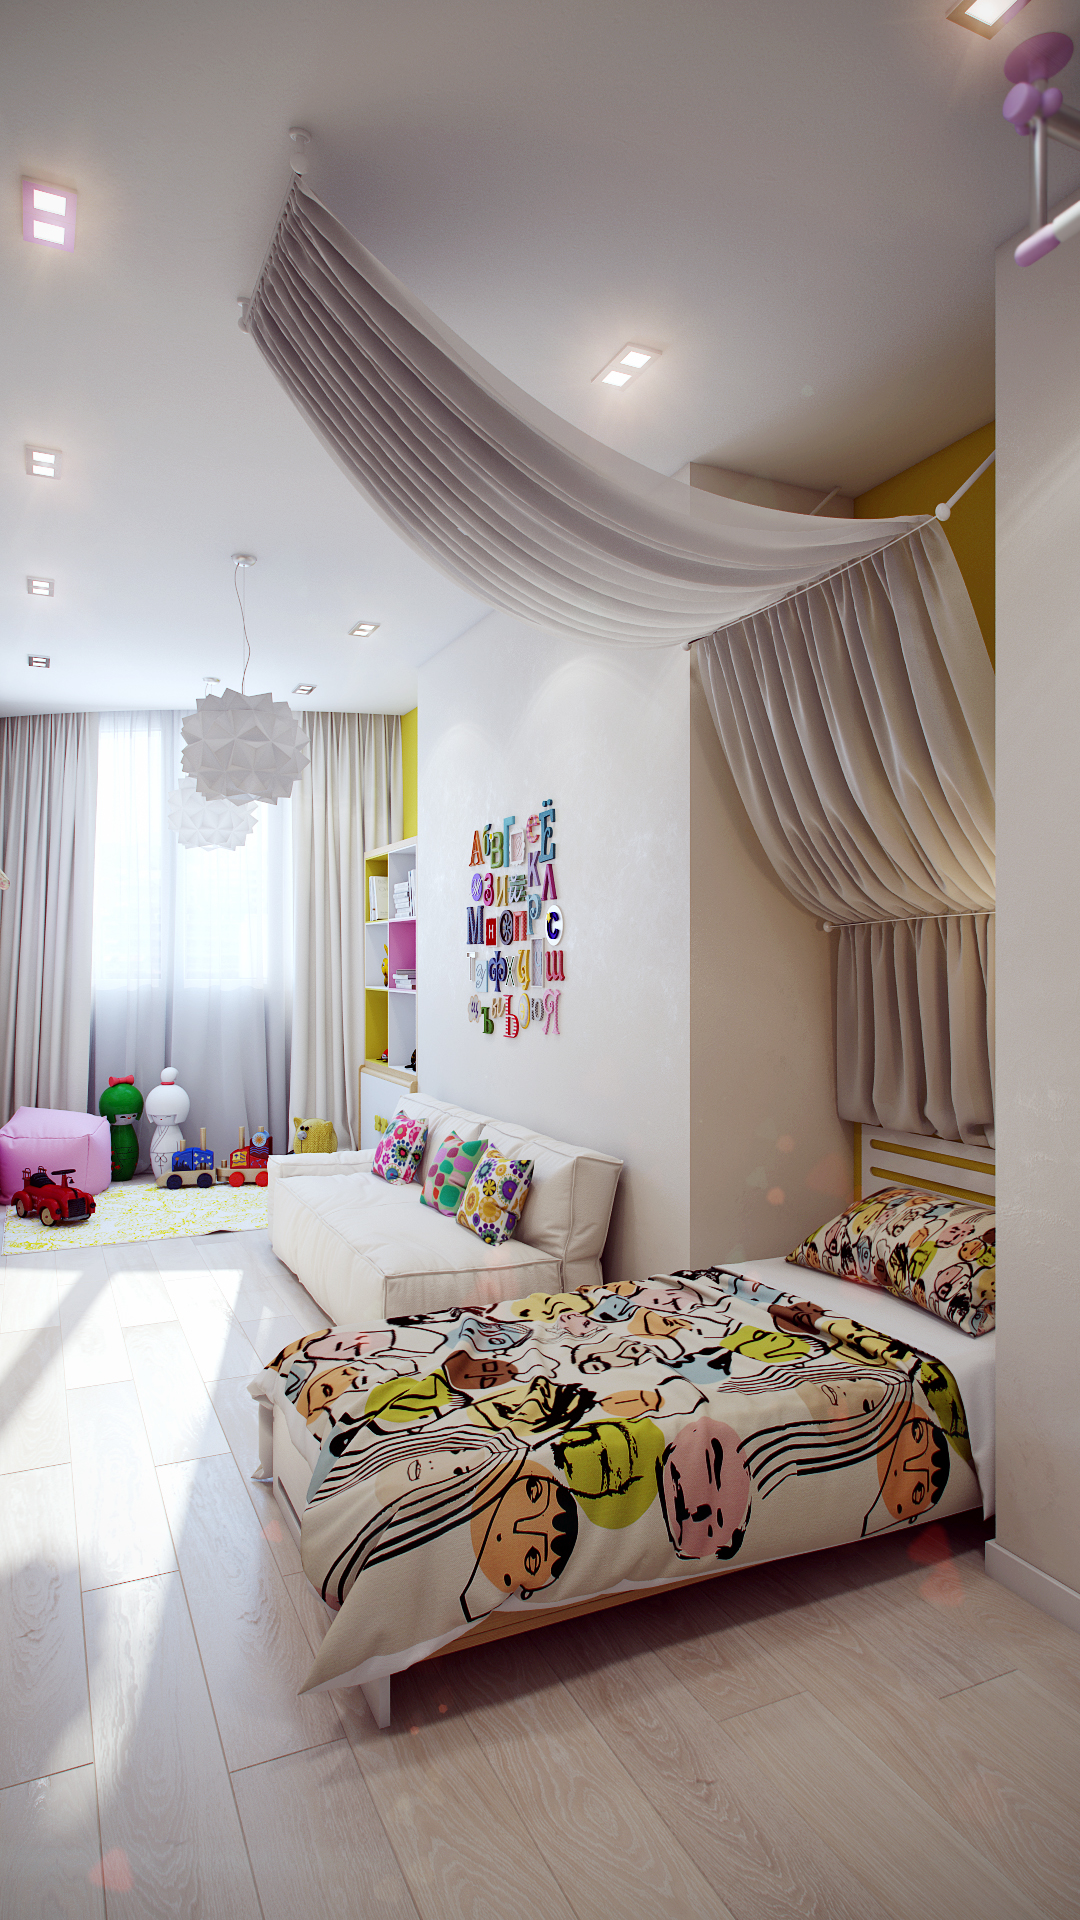 Remarkable Contemporary Kids Room Design